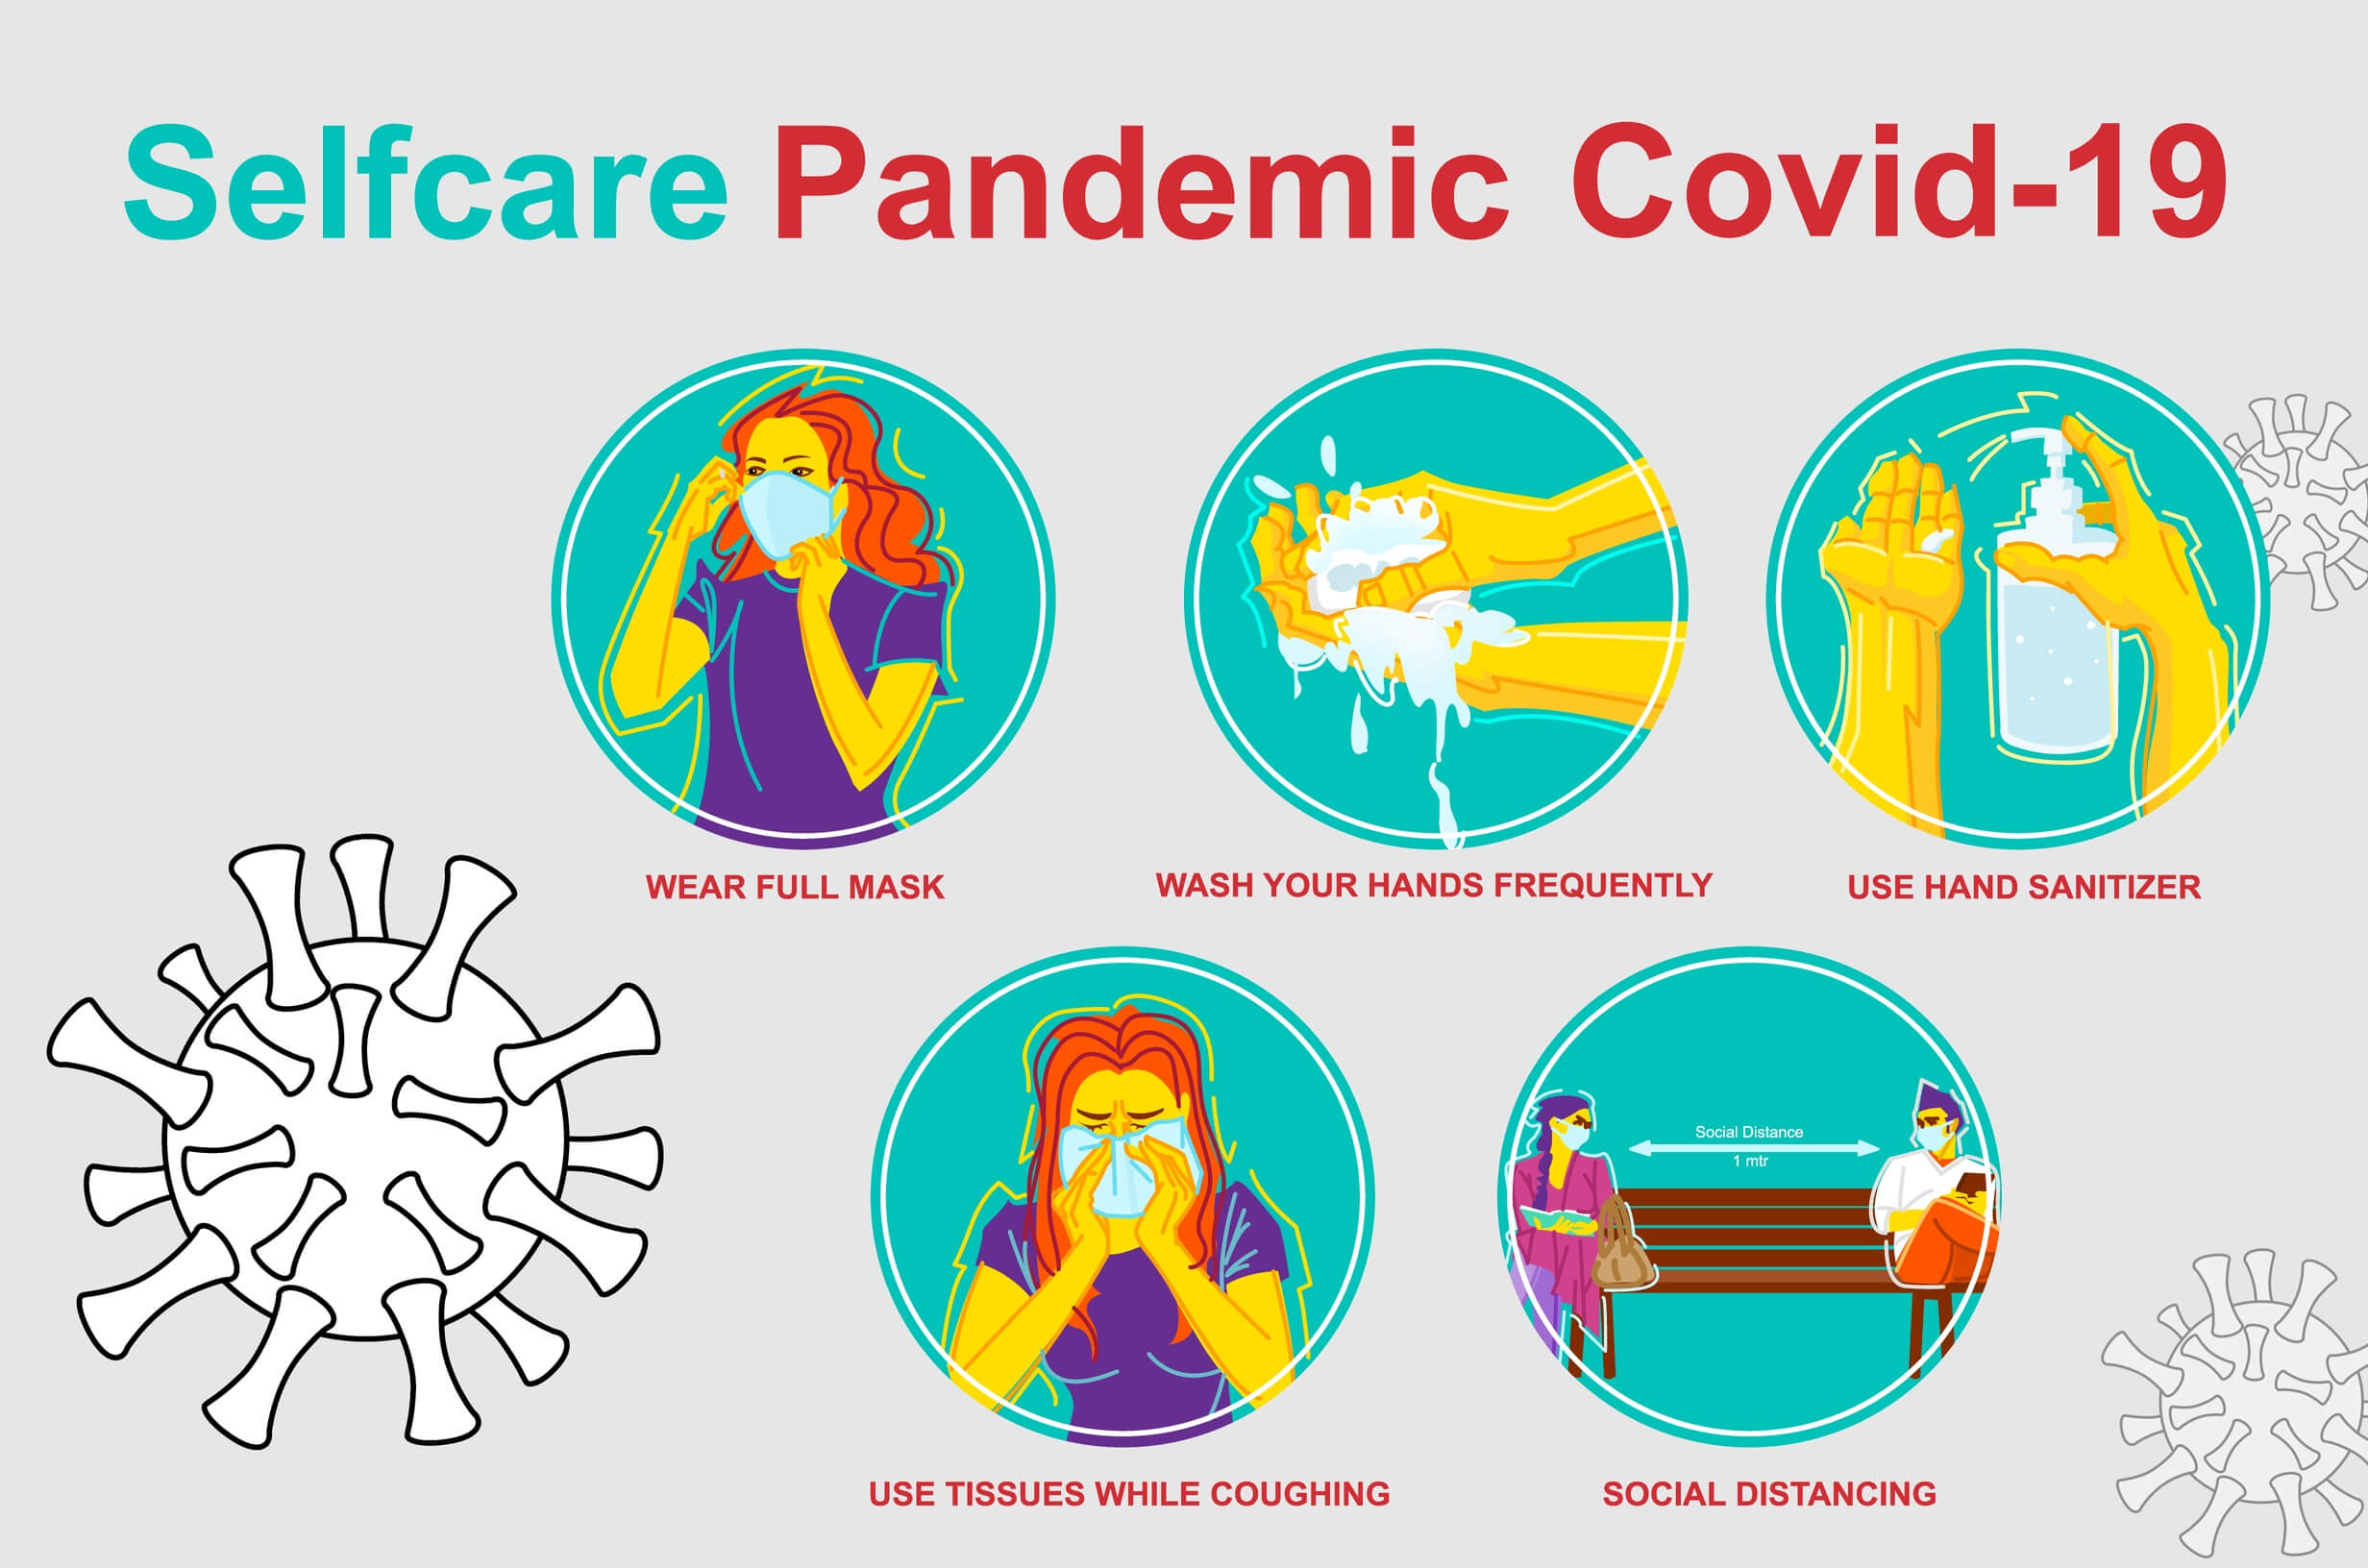 Healthy Living Tips During the Pandemic